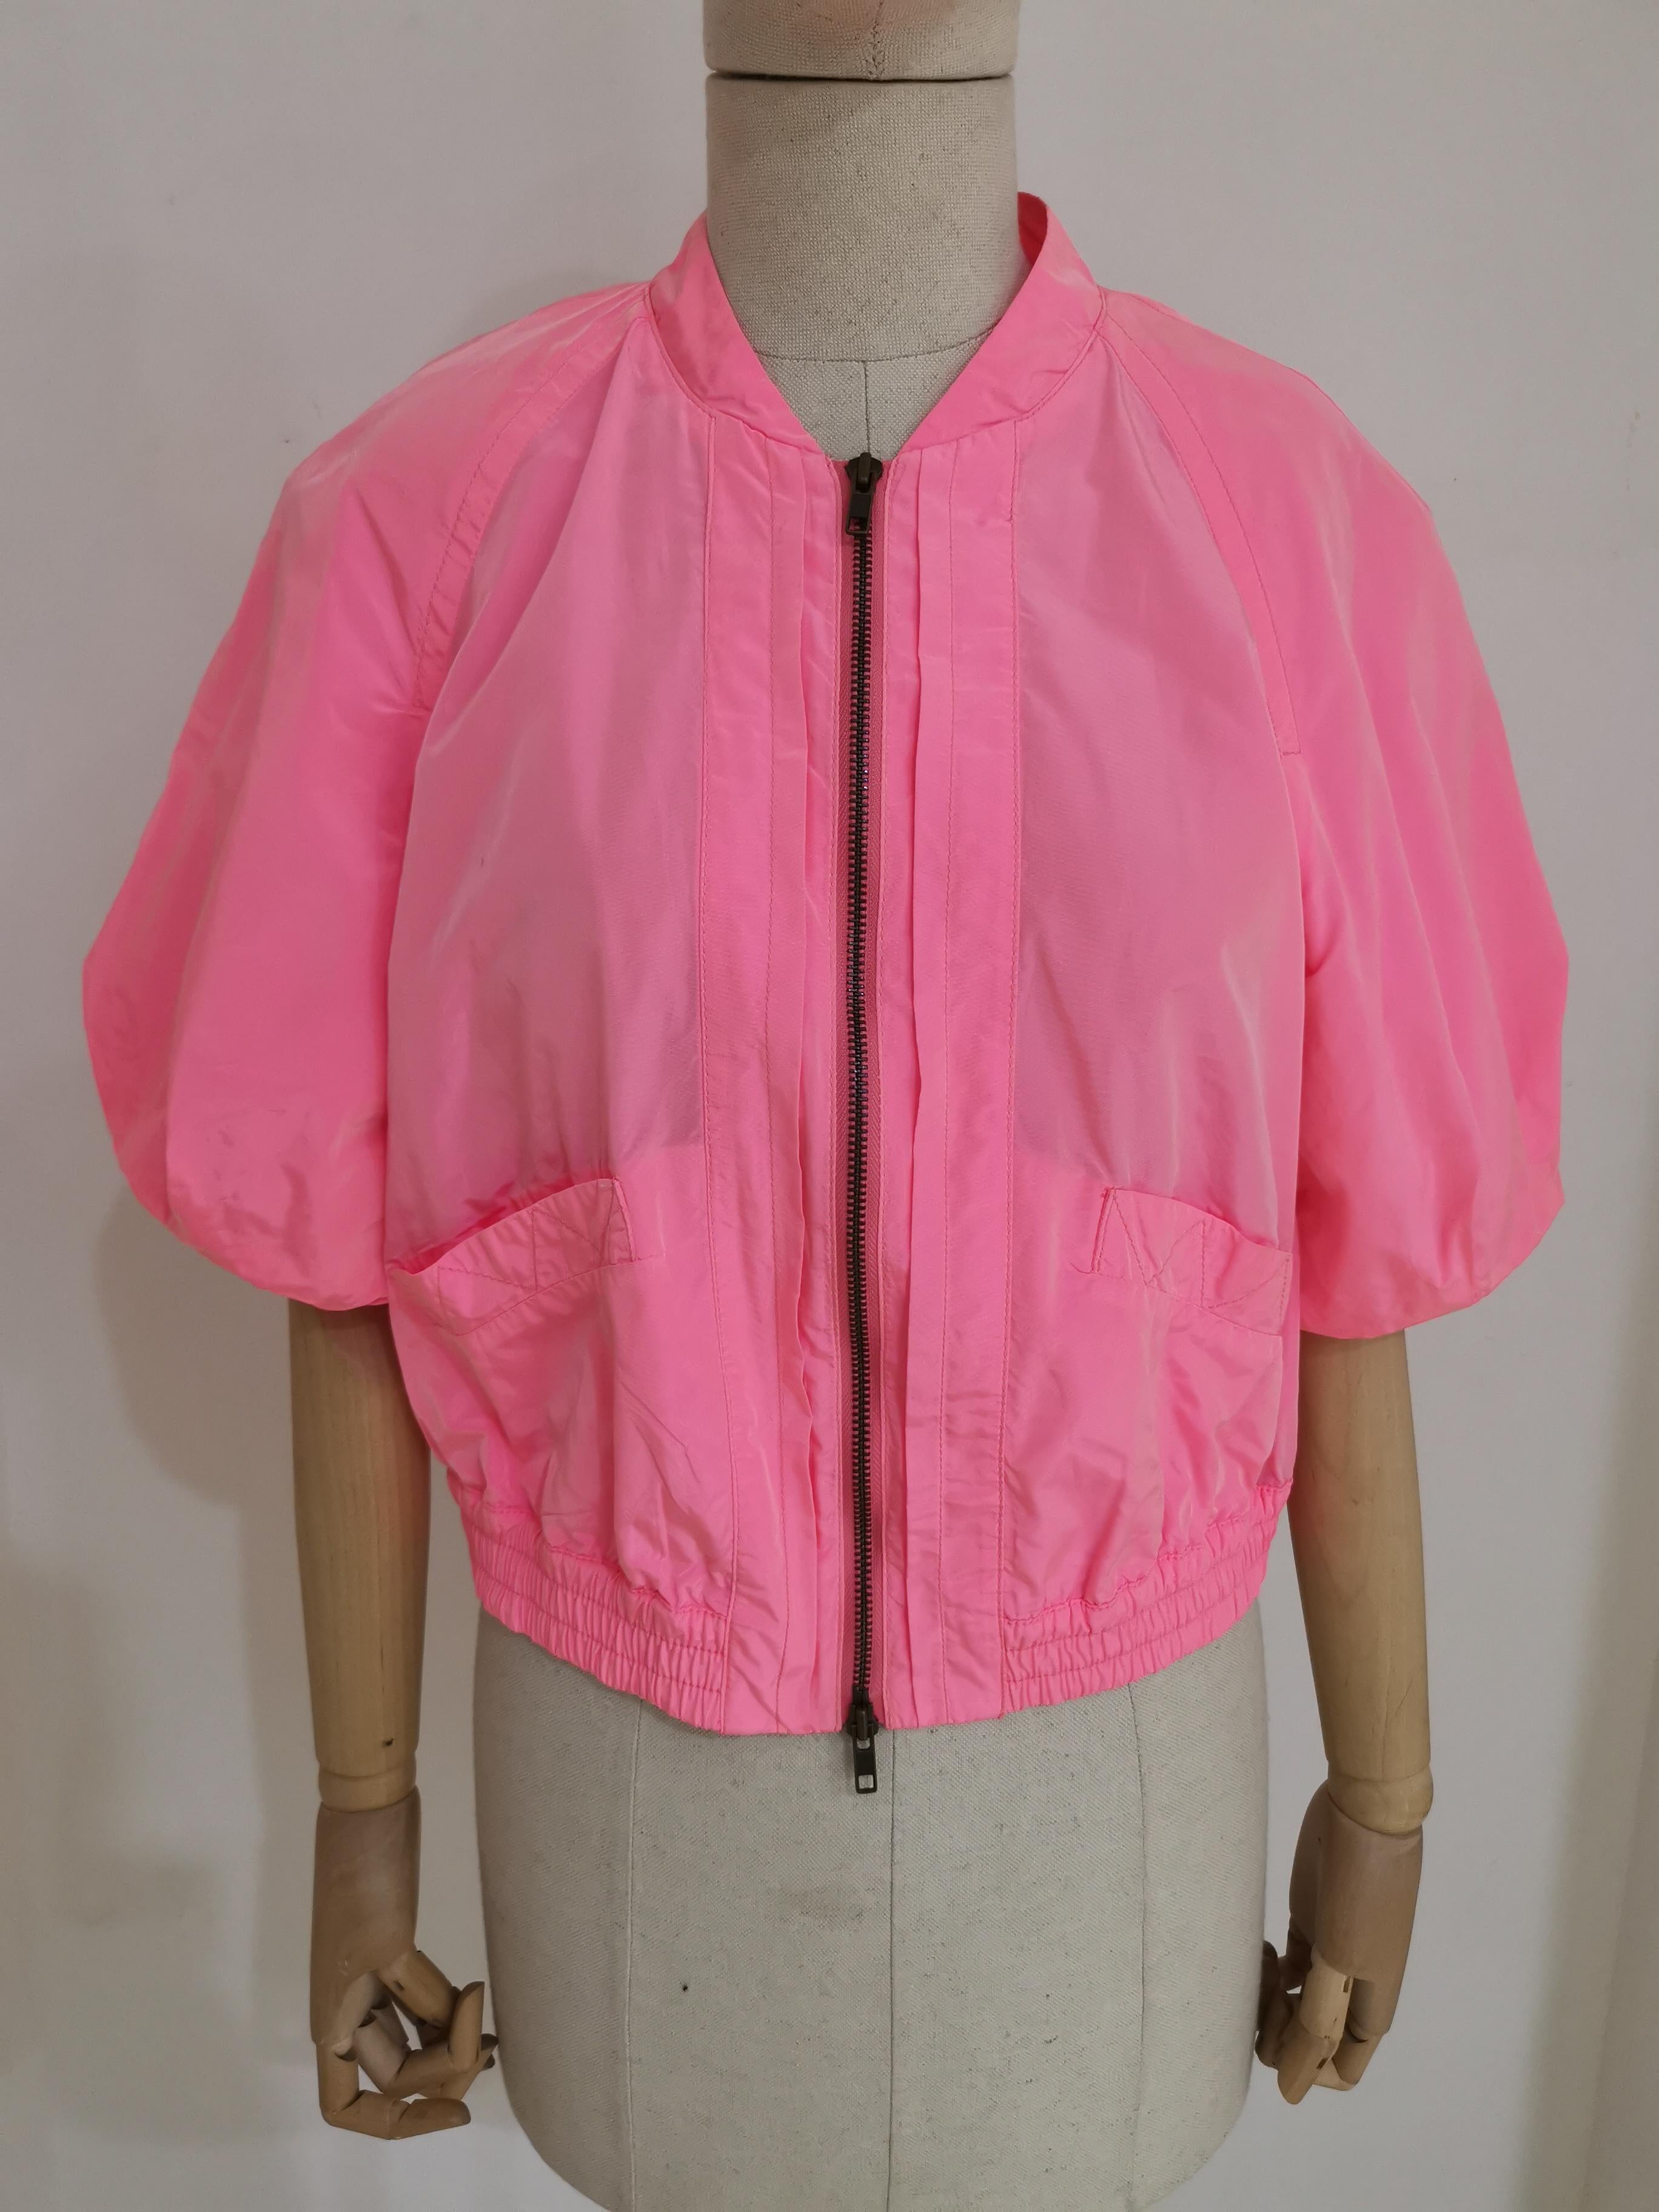 Mauro Grifoni pink jacket
totally made in italy 